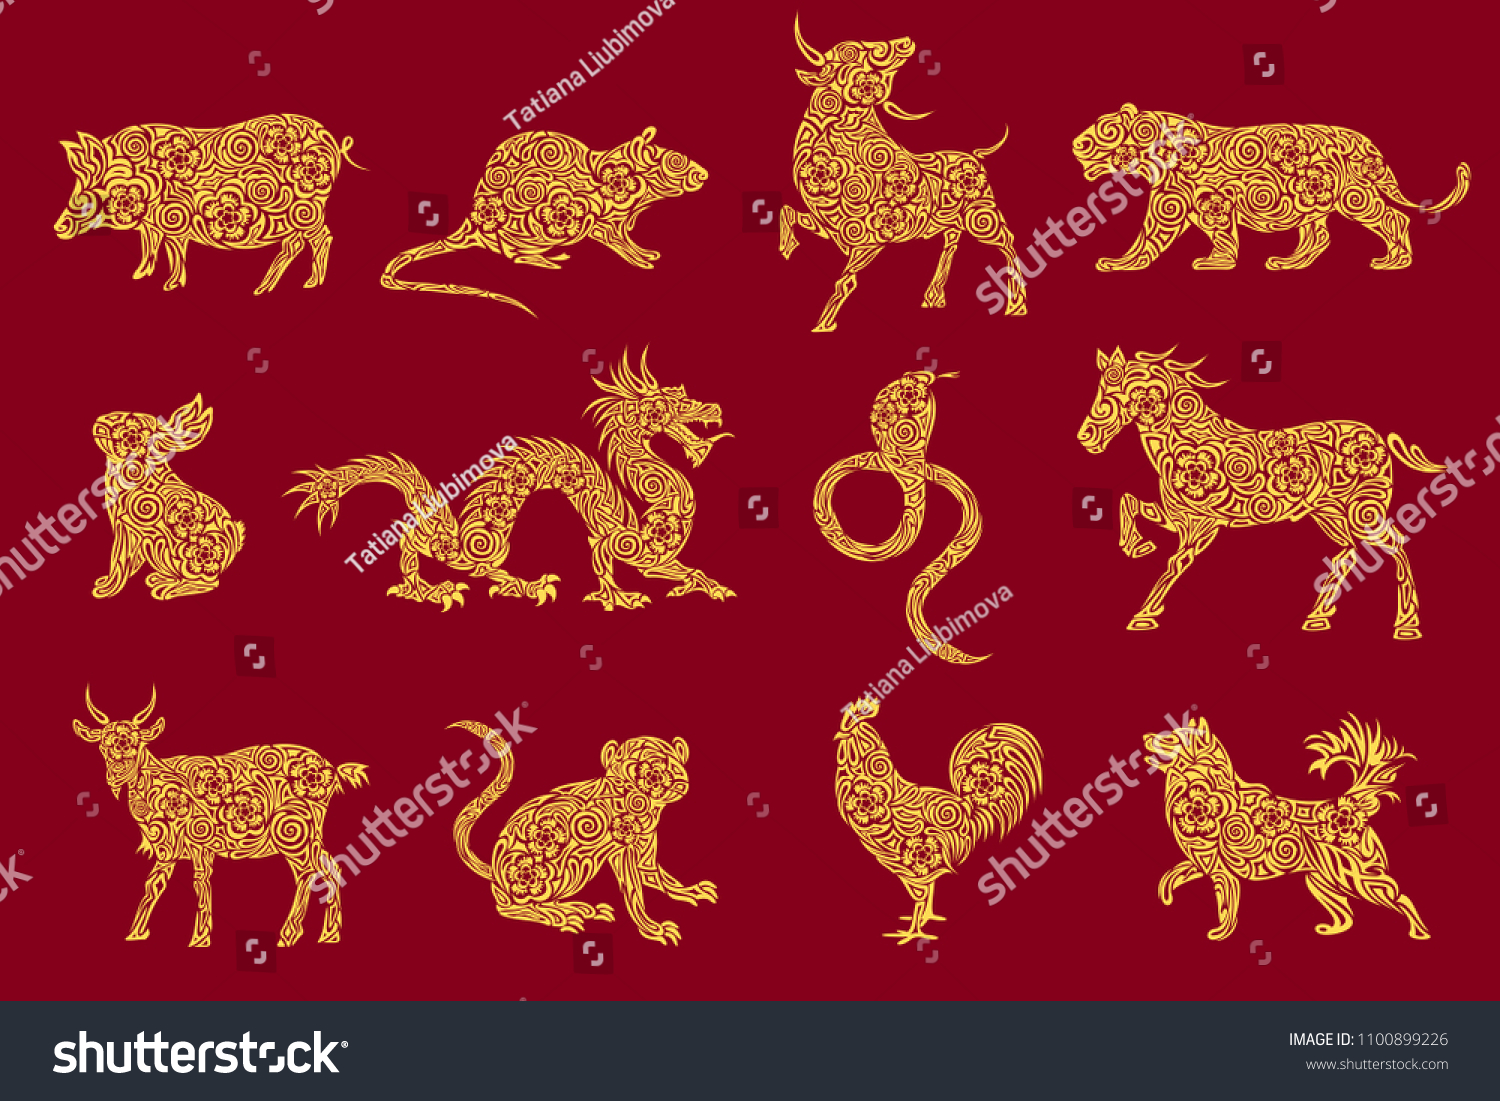 SVG of Set of all 12 zodiac animals for Chinese New Year celebration design. Vector illustrations in paper cut style. svg